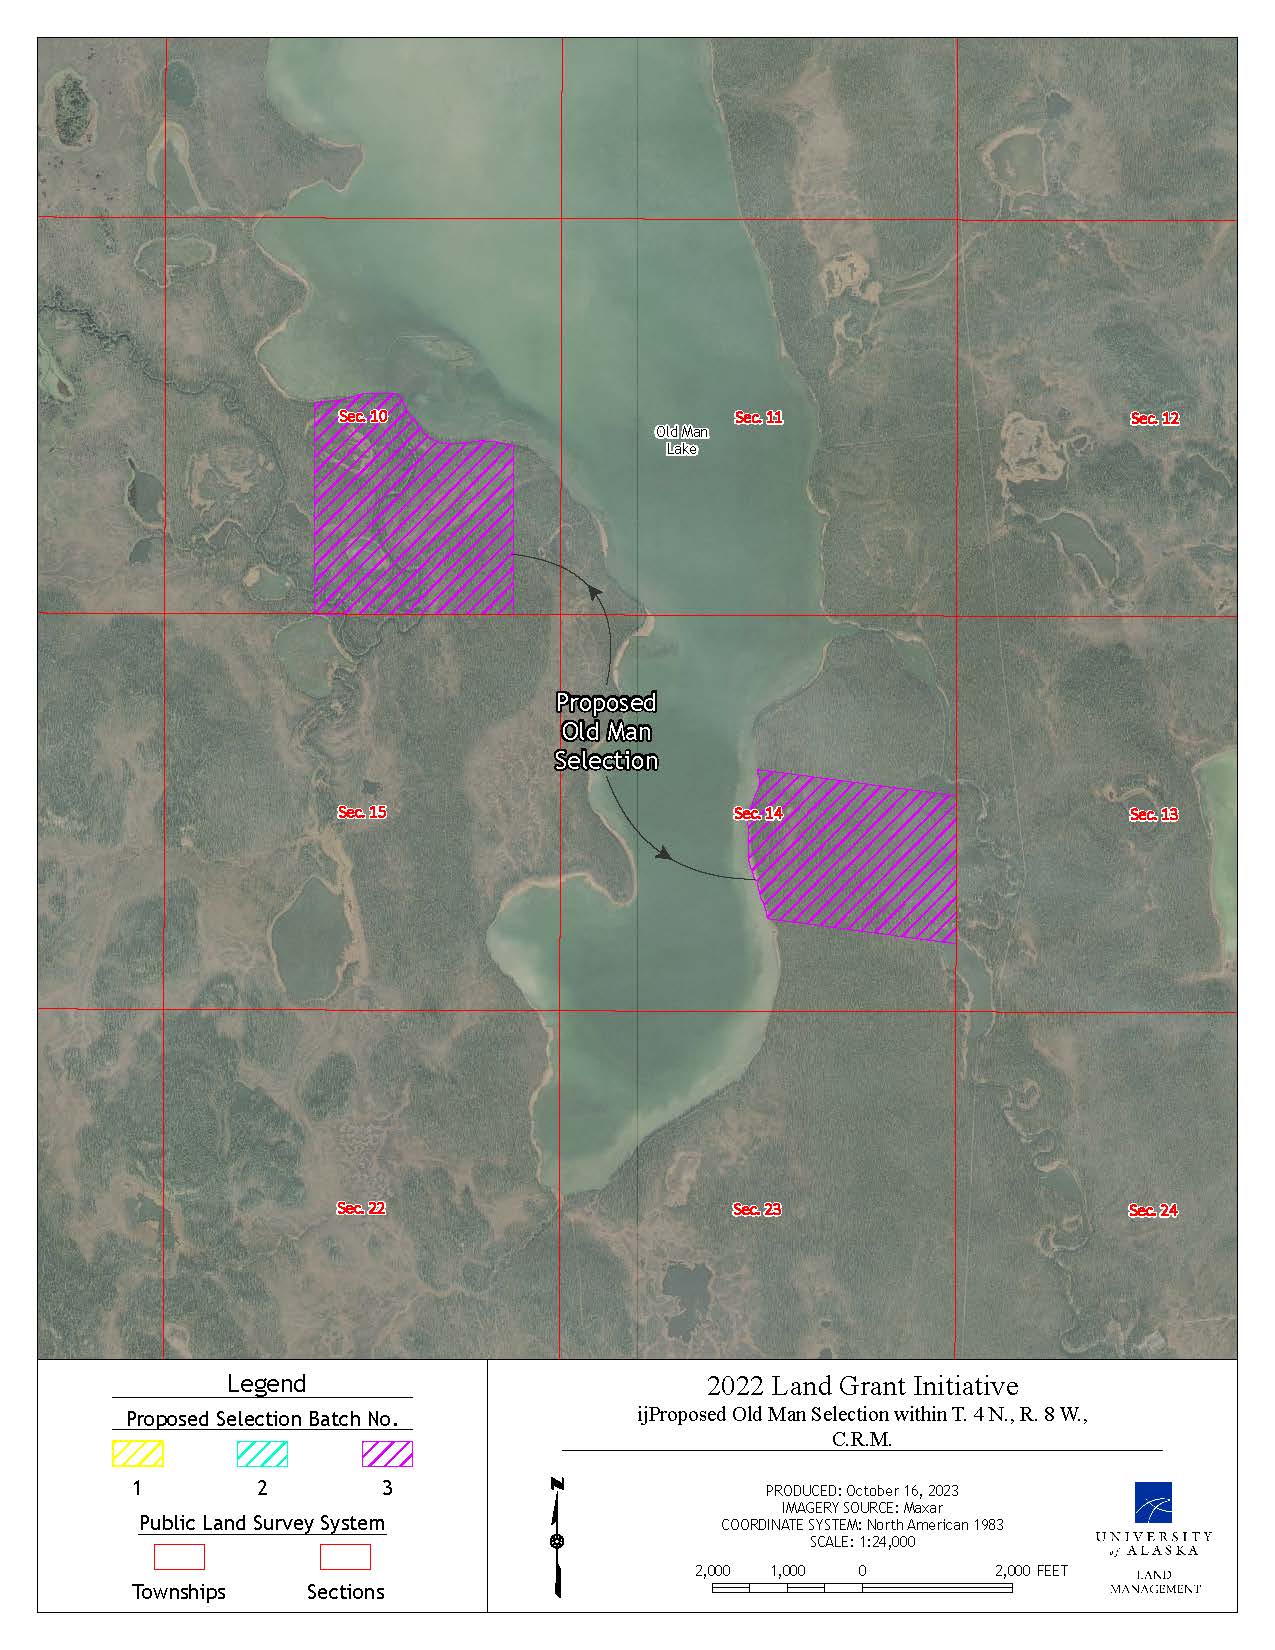 Map depicting the proposed selection of approximately 280 acres of the lands on Old Man Lake northwest of Mendeltna